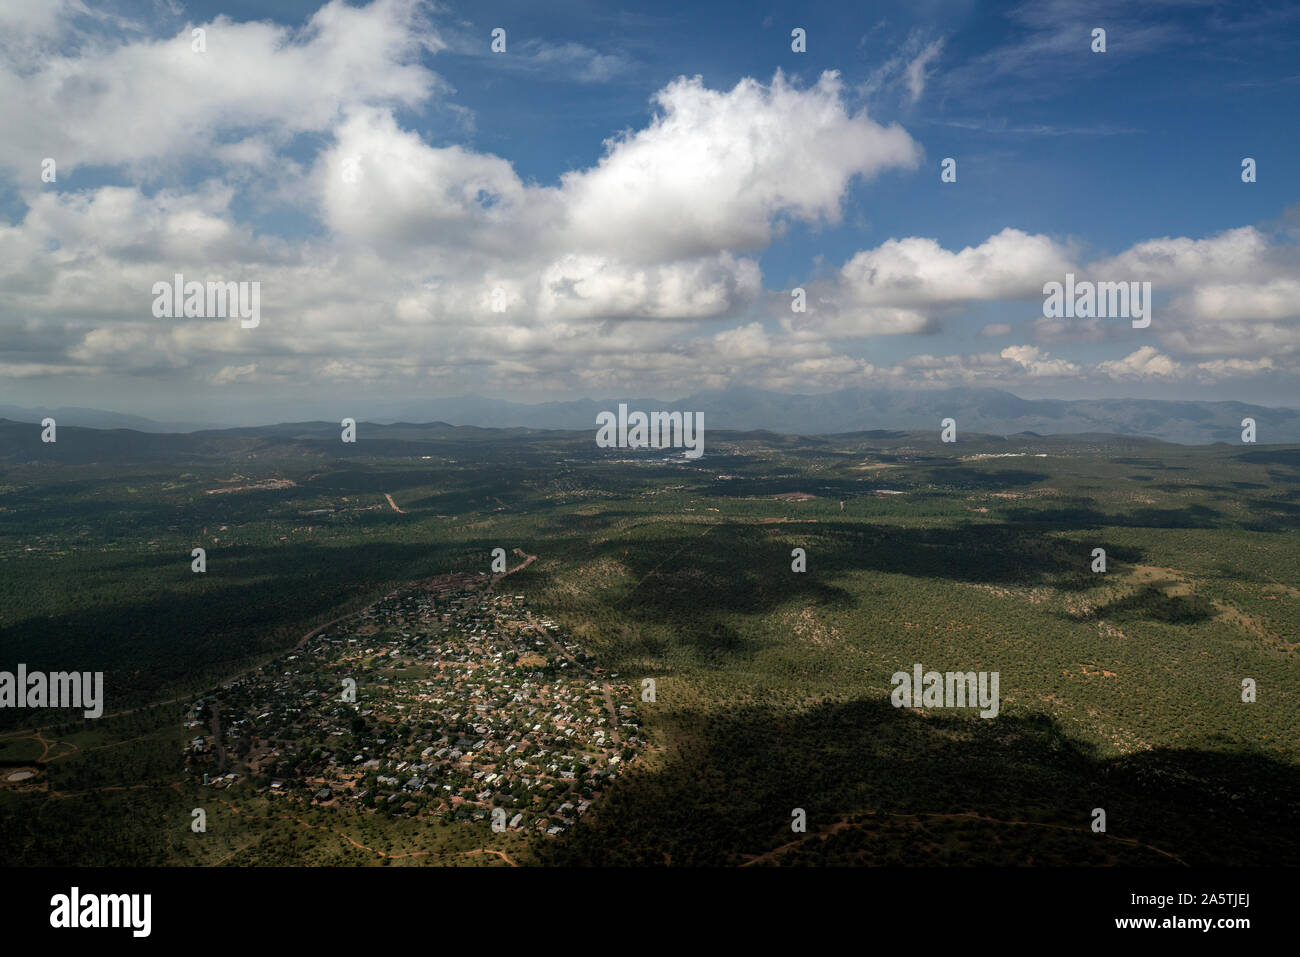 Aerial view looking down on a small village or town cloudy sky Stock Photo